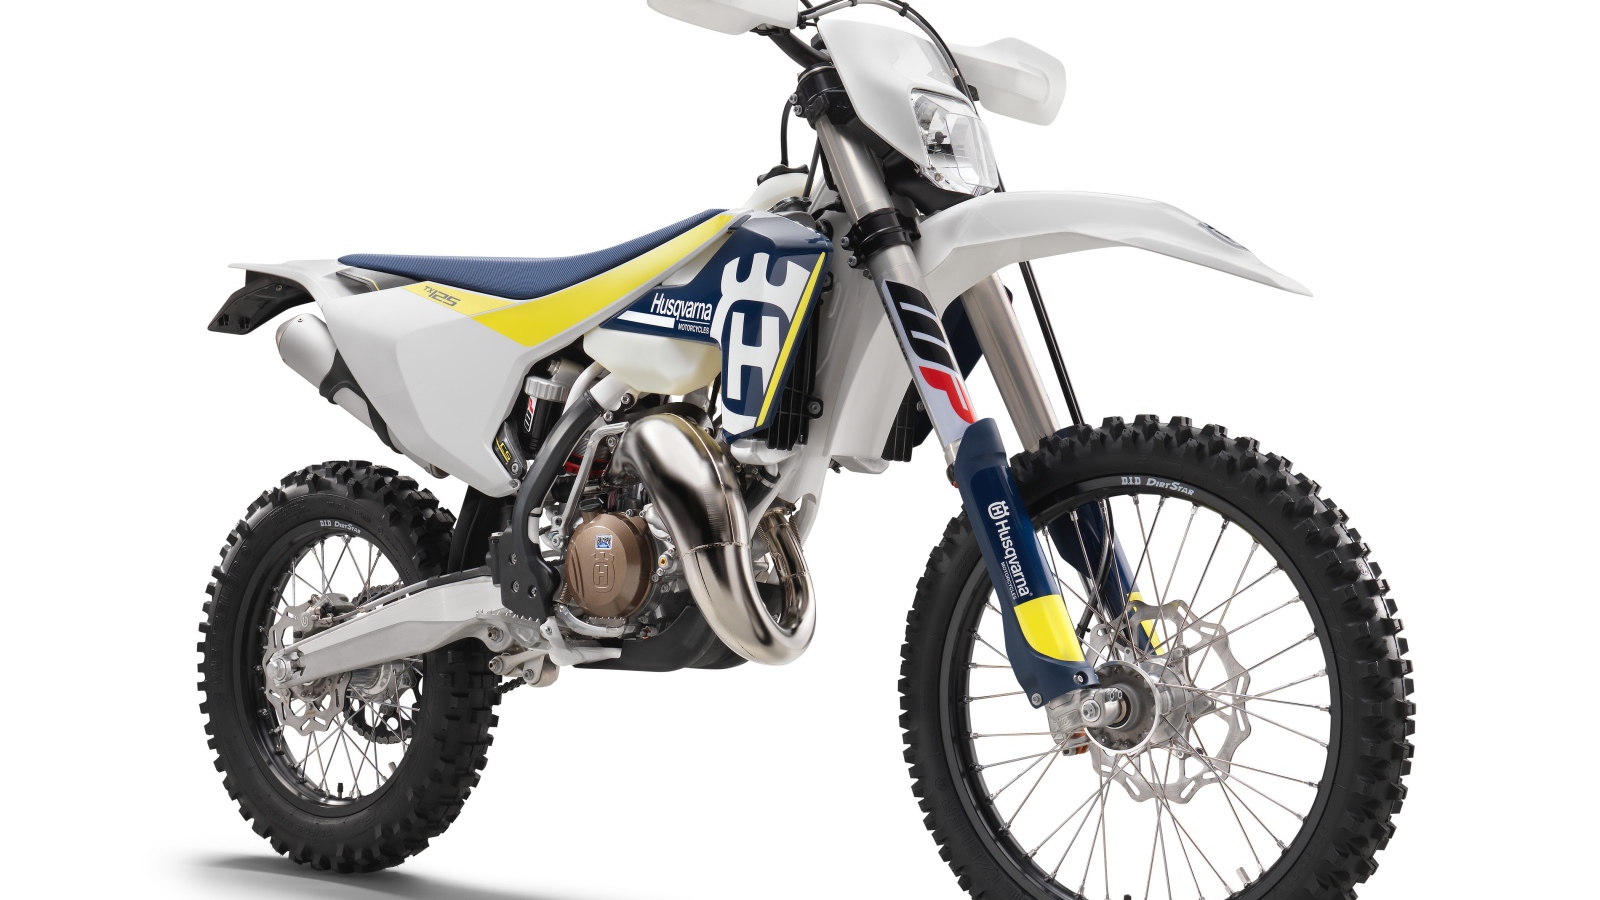 Husqvarna TX 125 racing motorcycle, 2020 on a white background